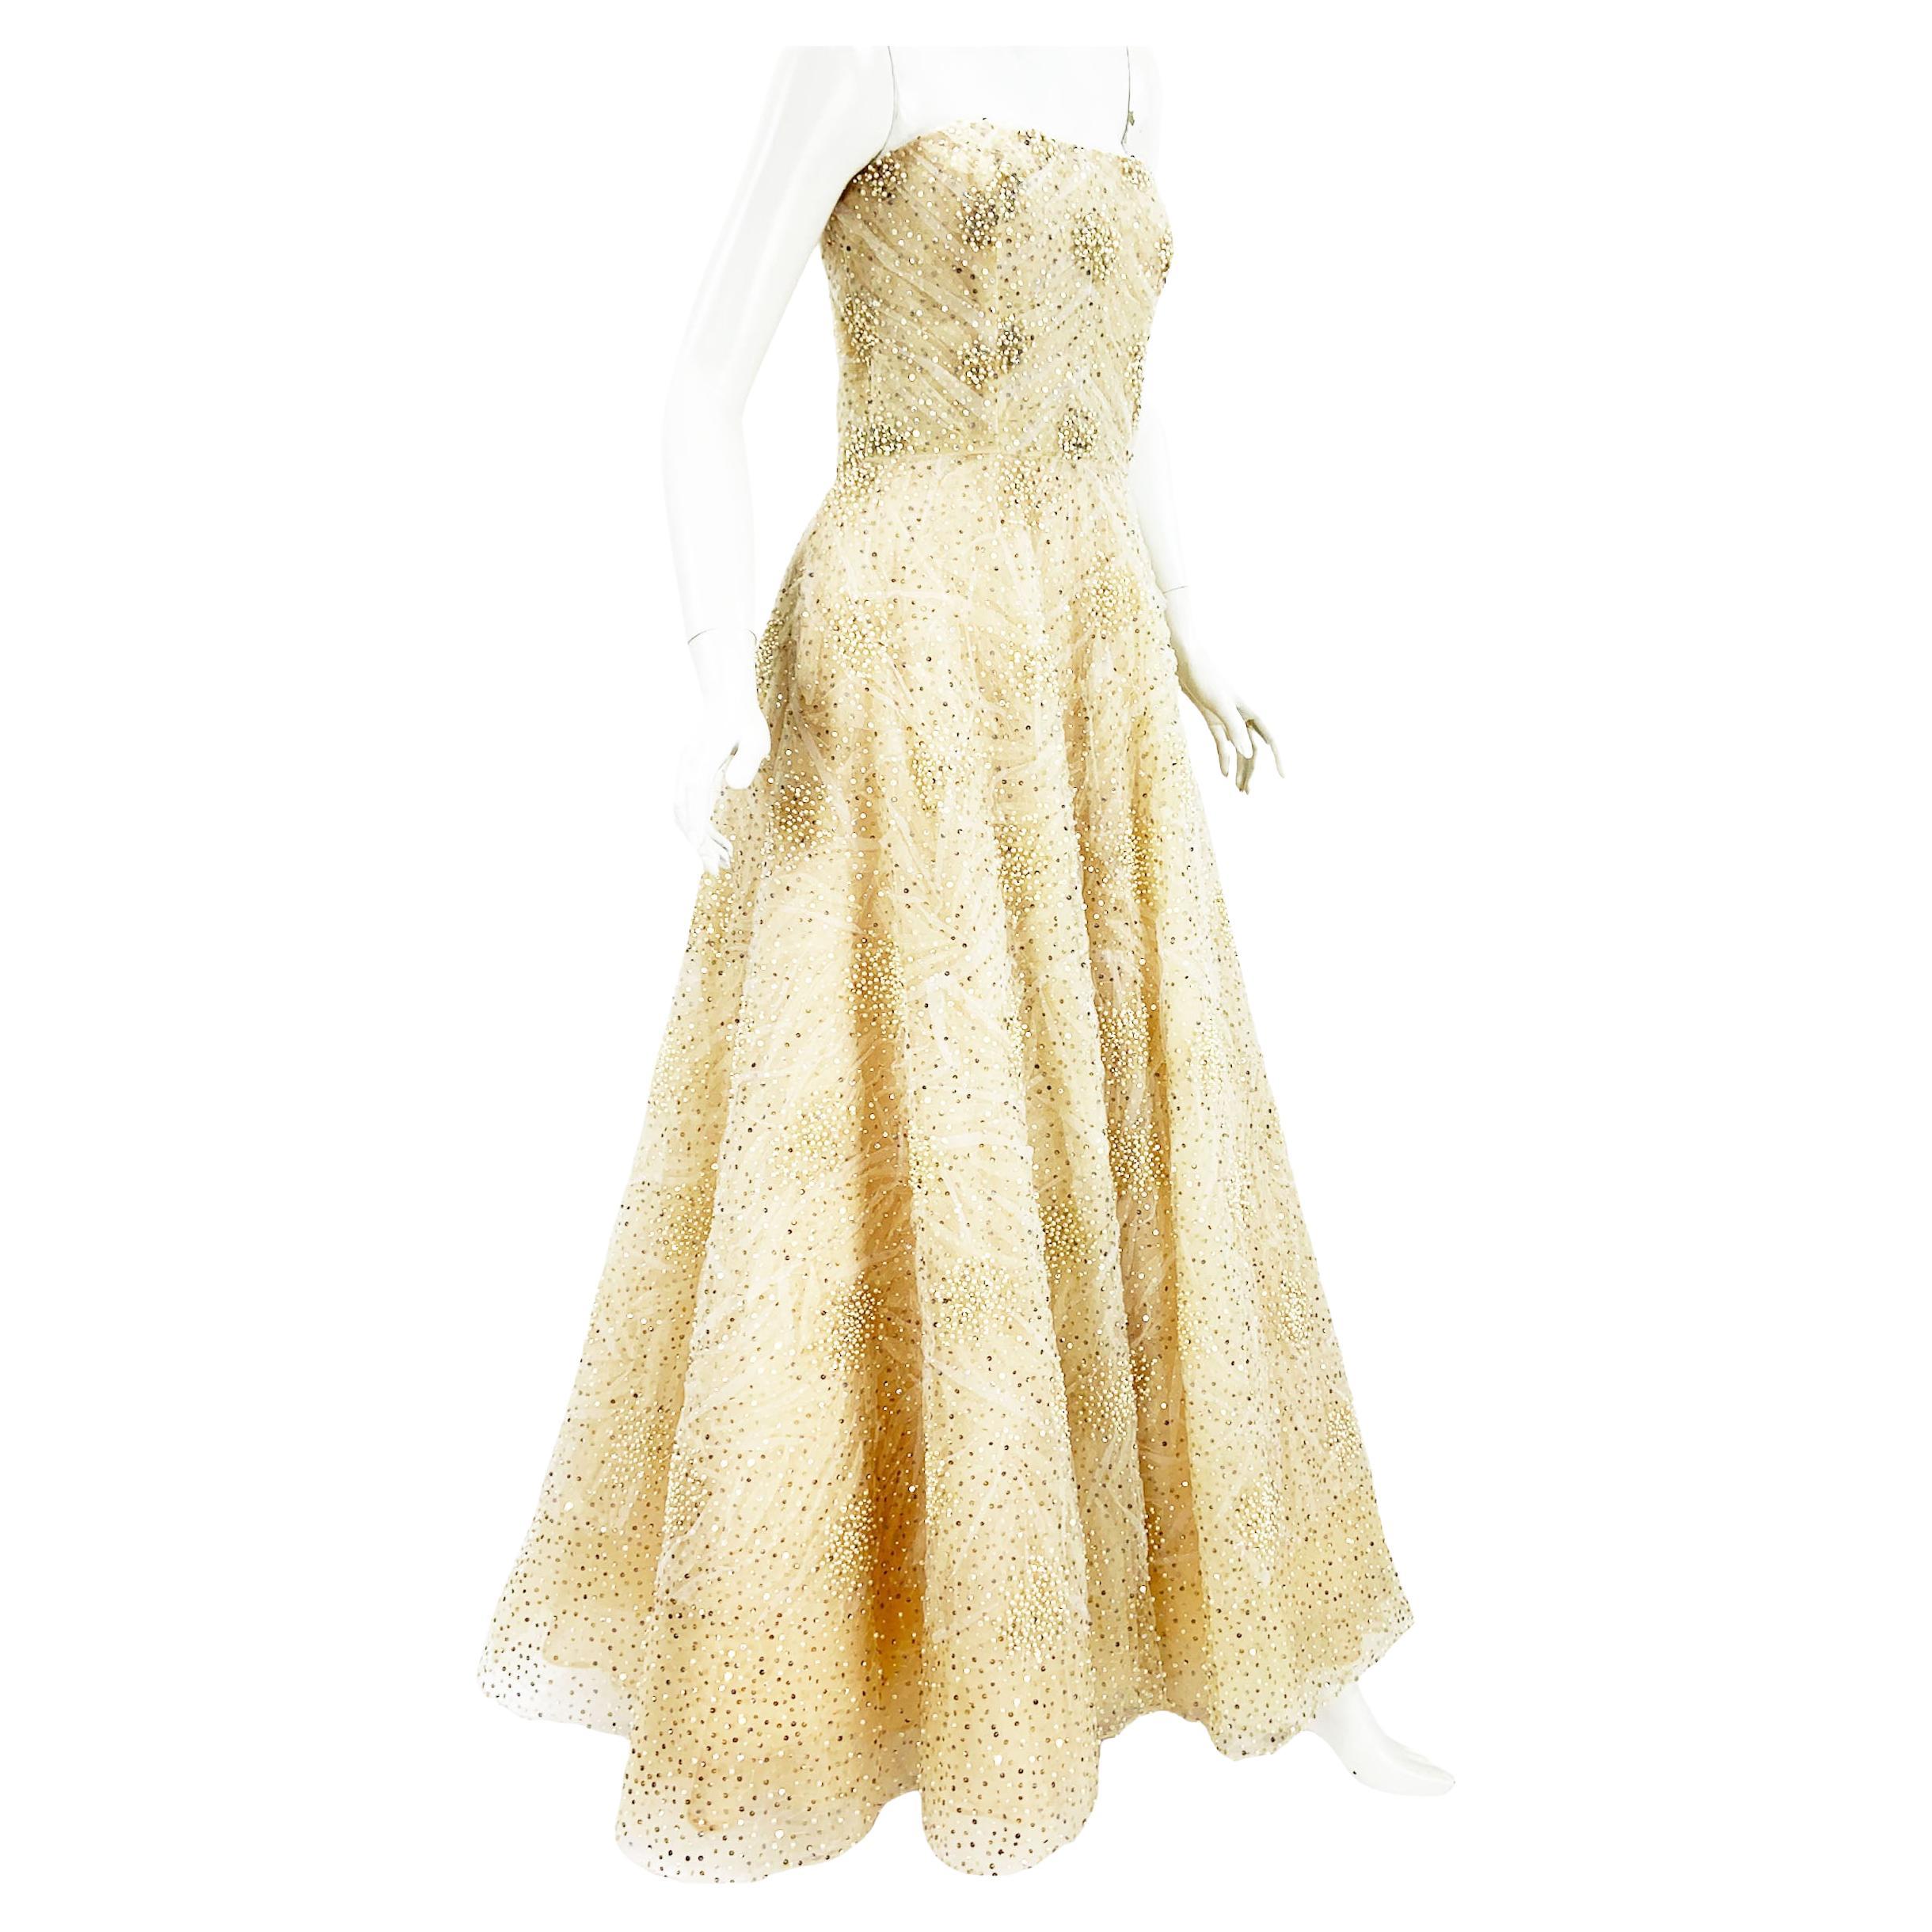 NWT Oscar de la Renta 2008 Collection Champagne Fully Beaded Dress Gown US 8 For Sale